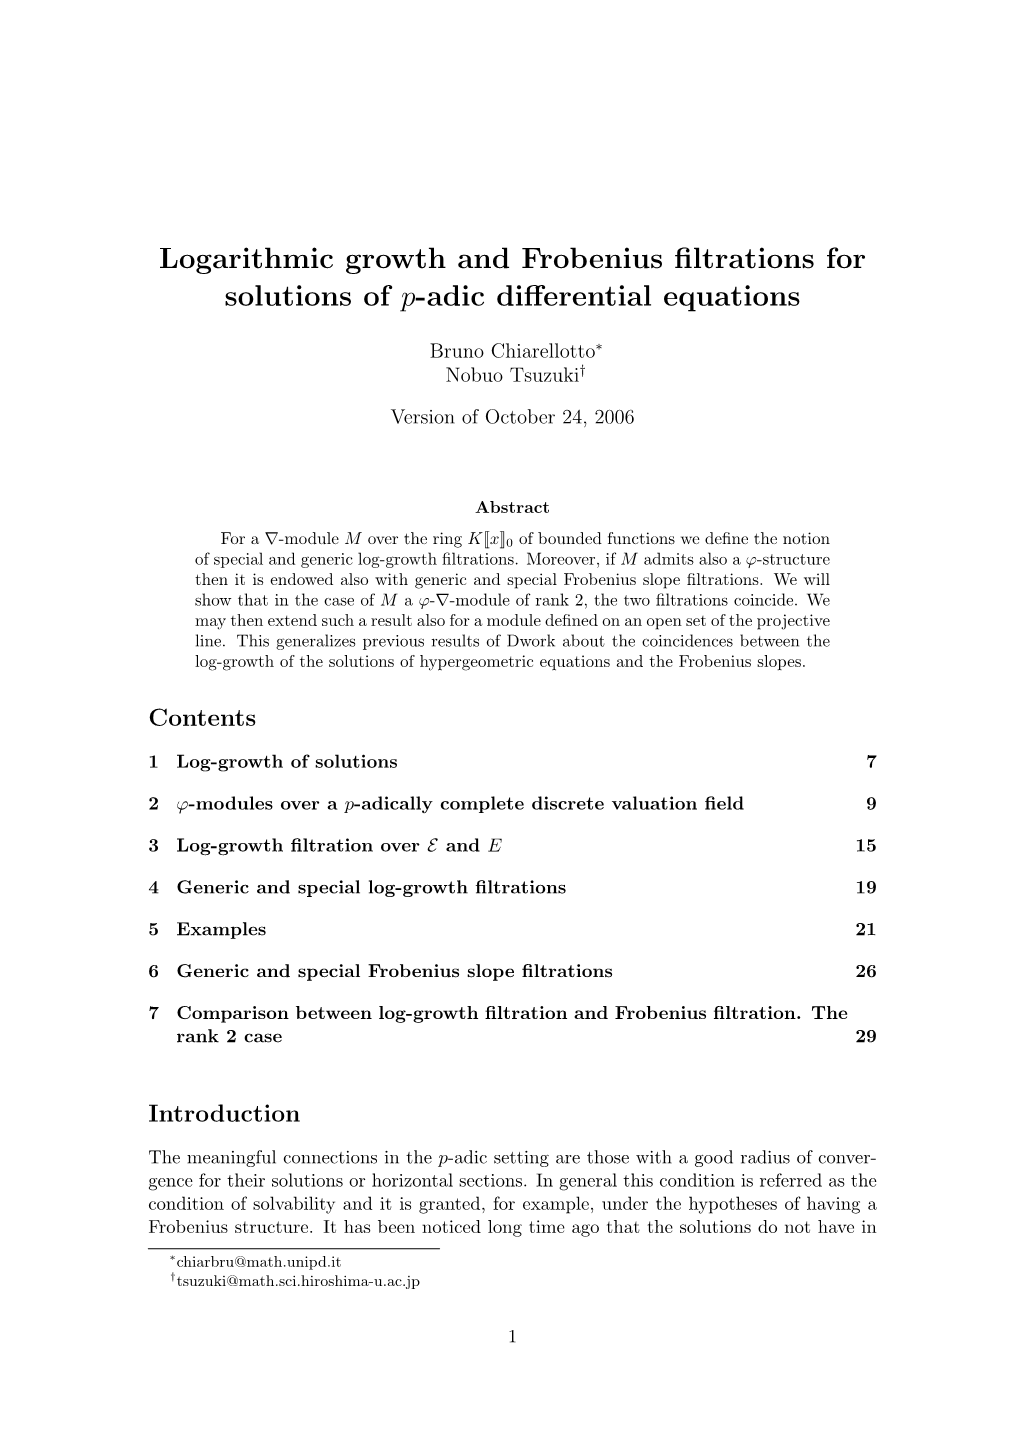 Logarithmic Growth and Frobenius Filtrations for Solutions of P-Adic